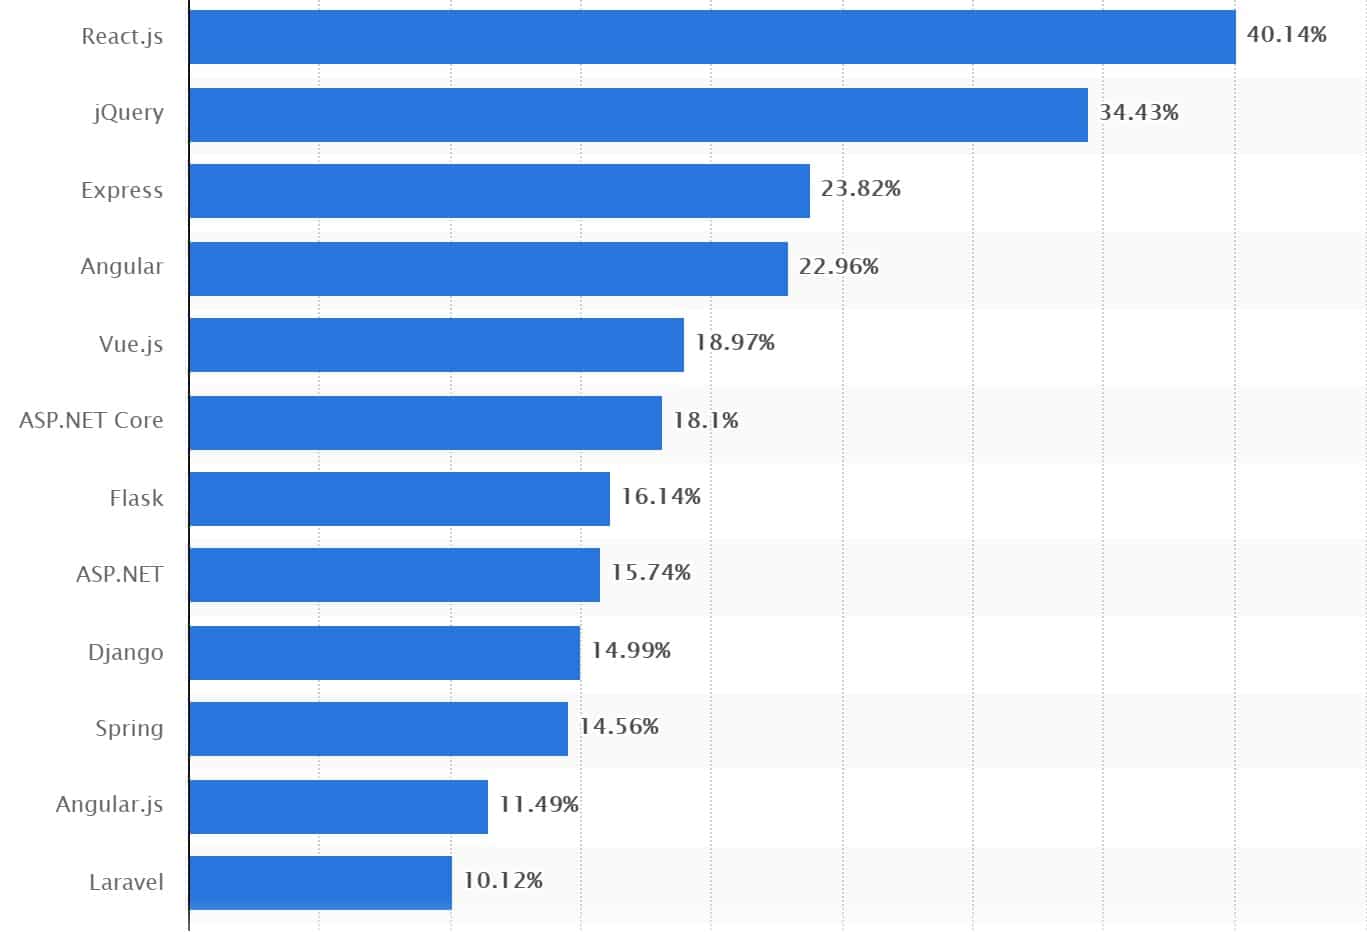 A survey results chart showing the popularity of various web frameworks.